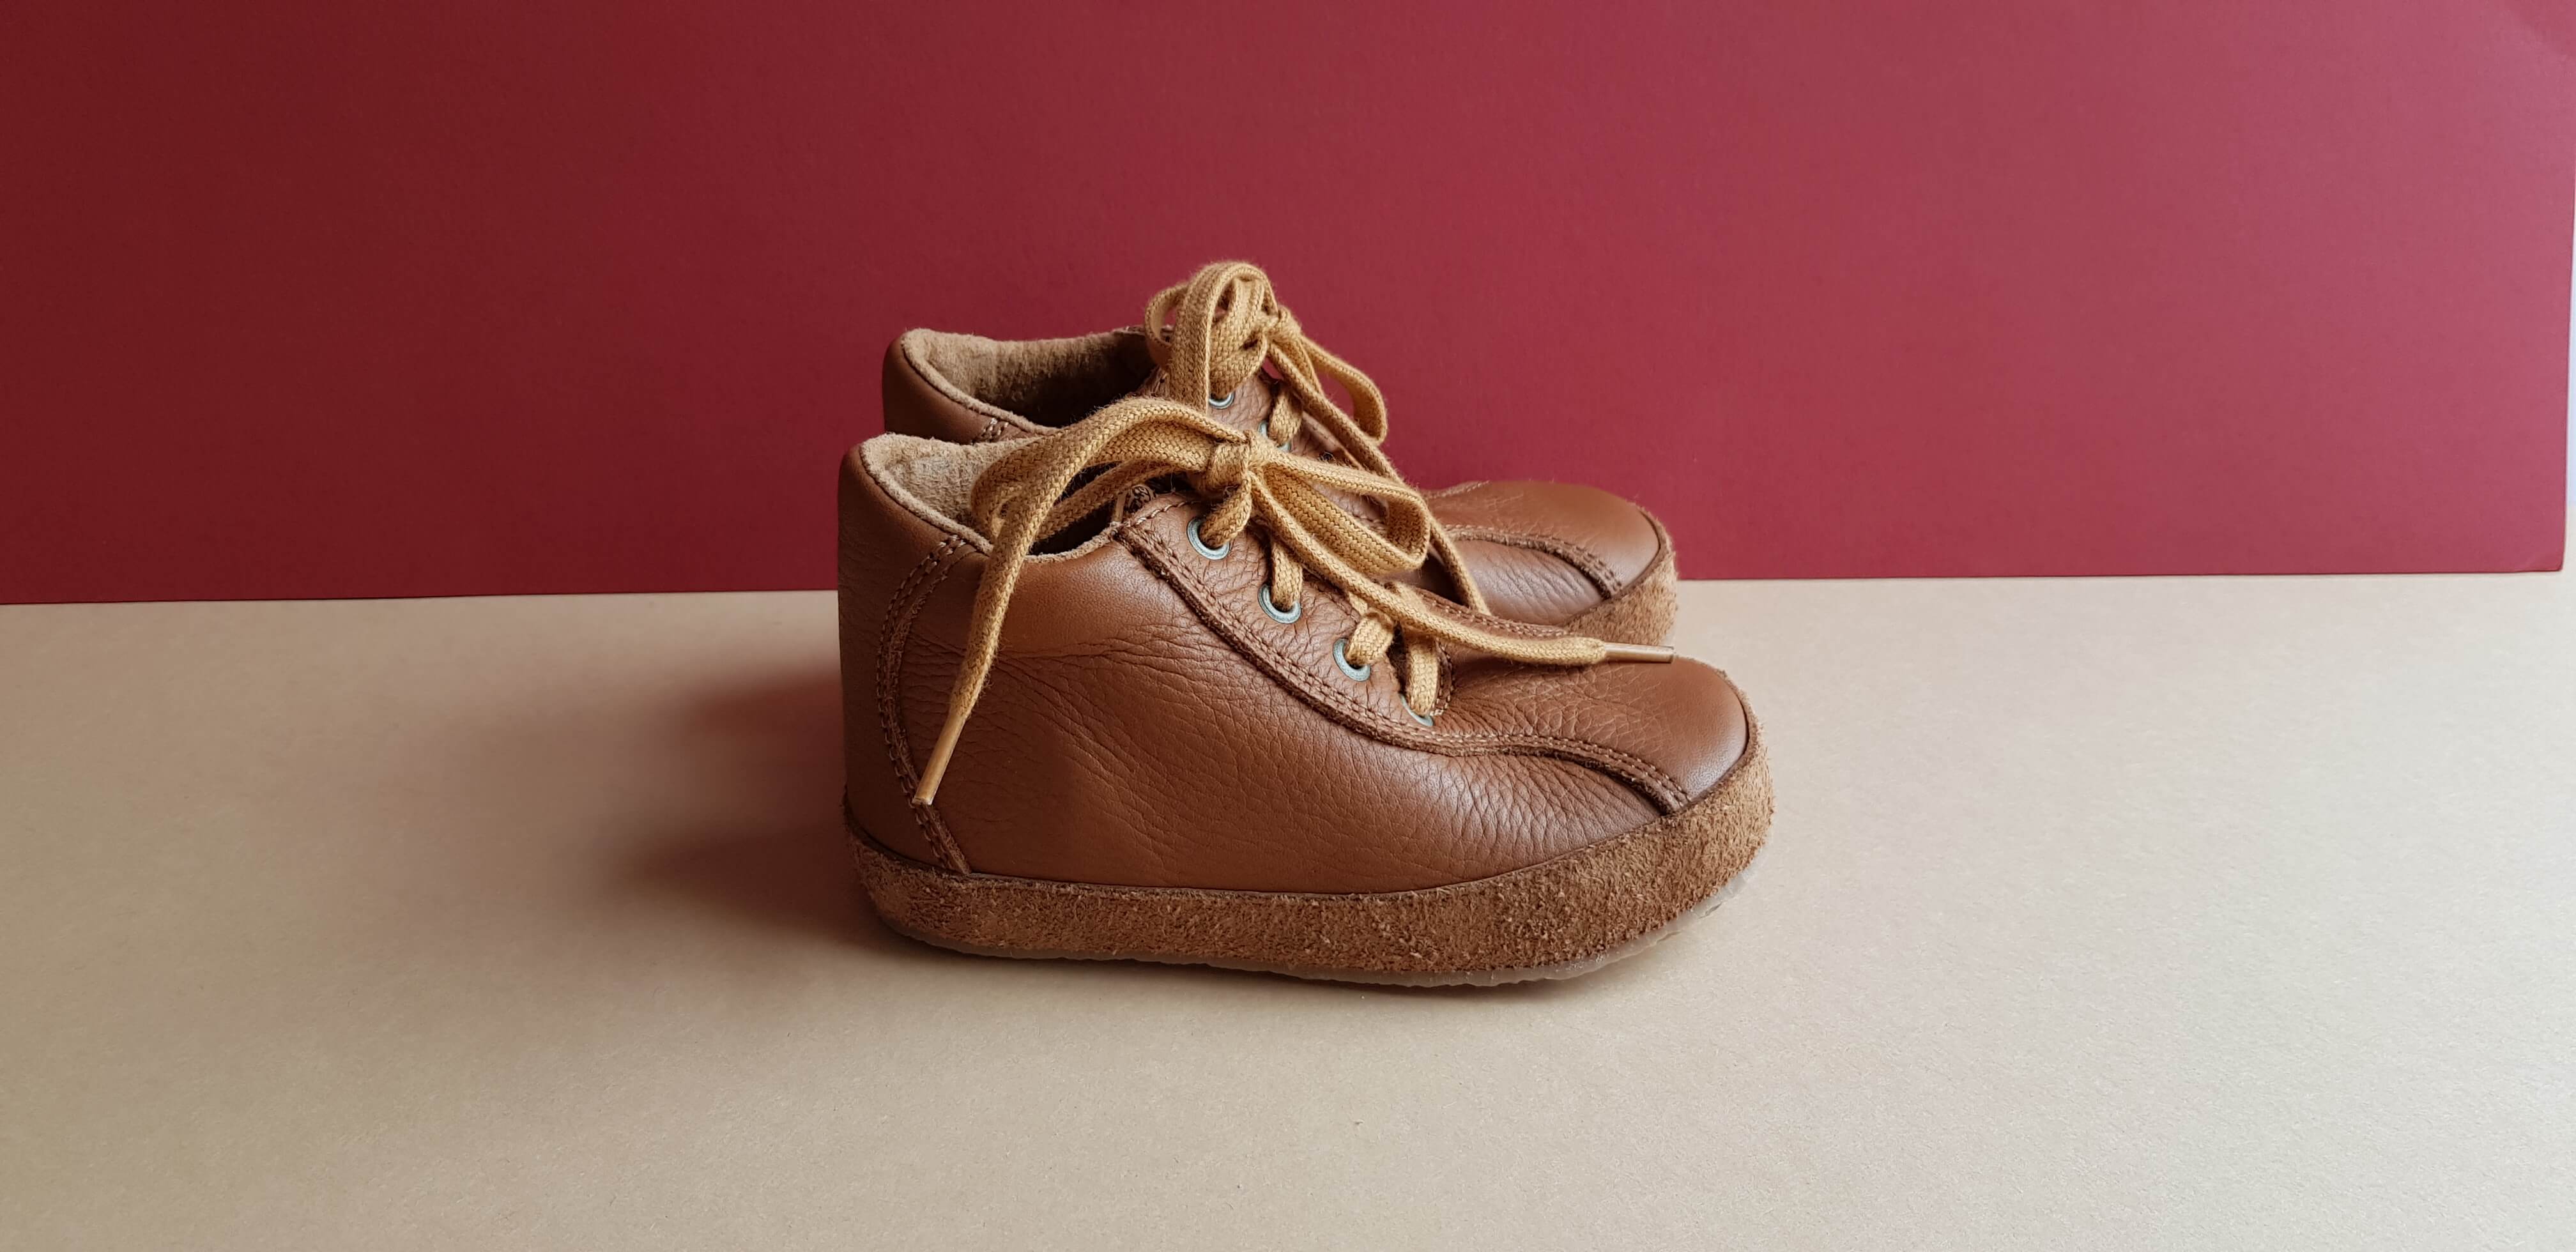 Vintage style Laced Barefoot First Shoes in brown Leather for narrow to standard feet